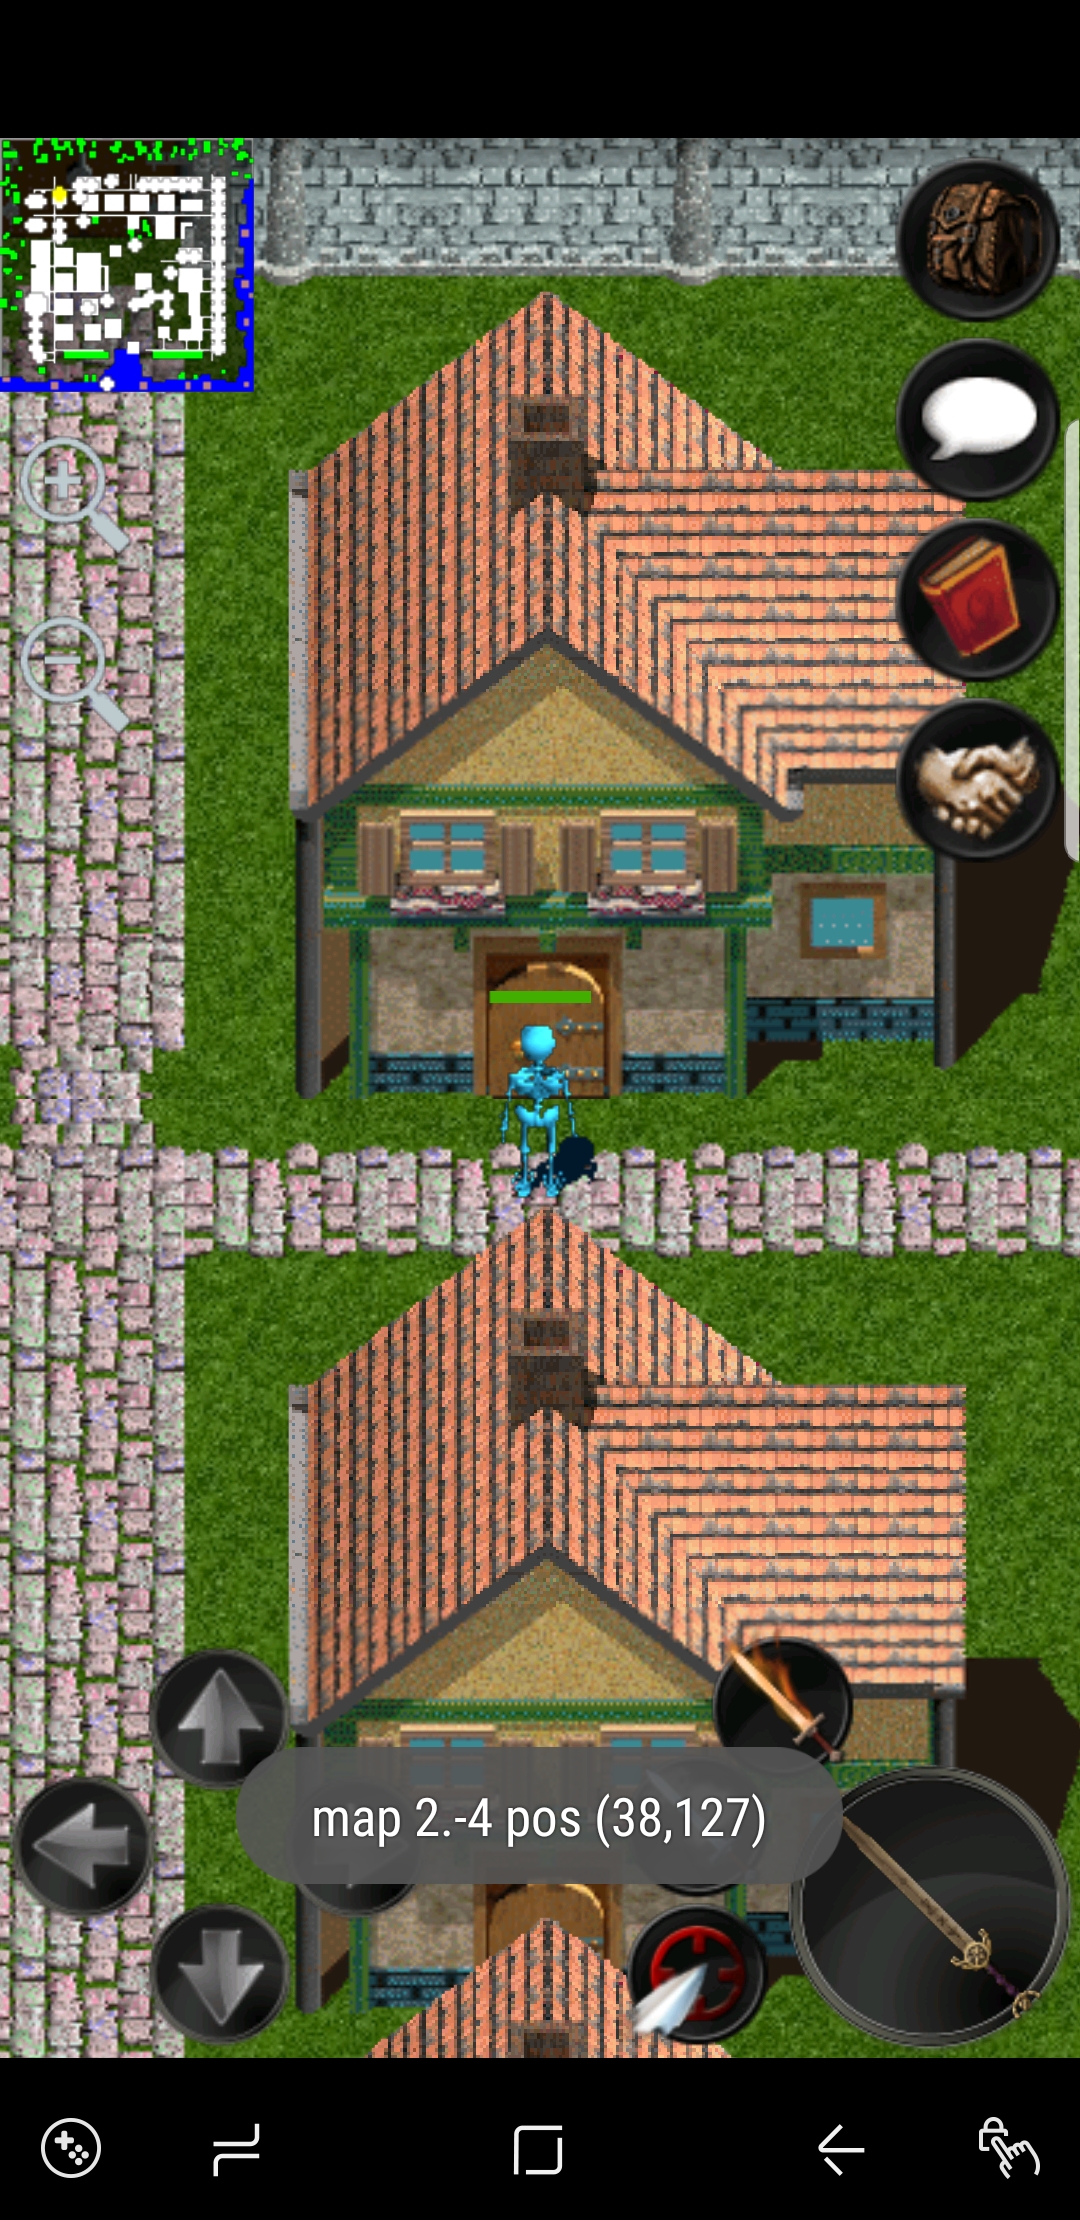 I want to buy house at Map 2.-4 pos (38,127)